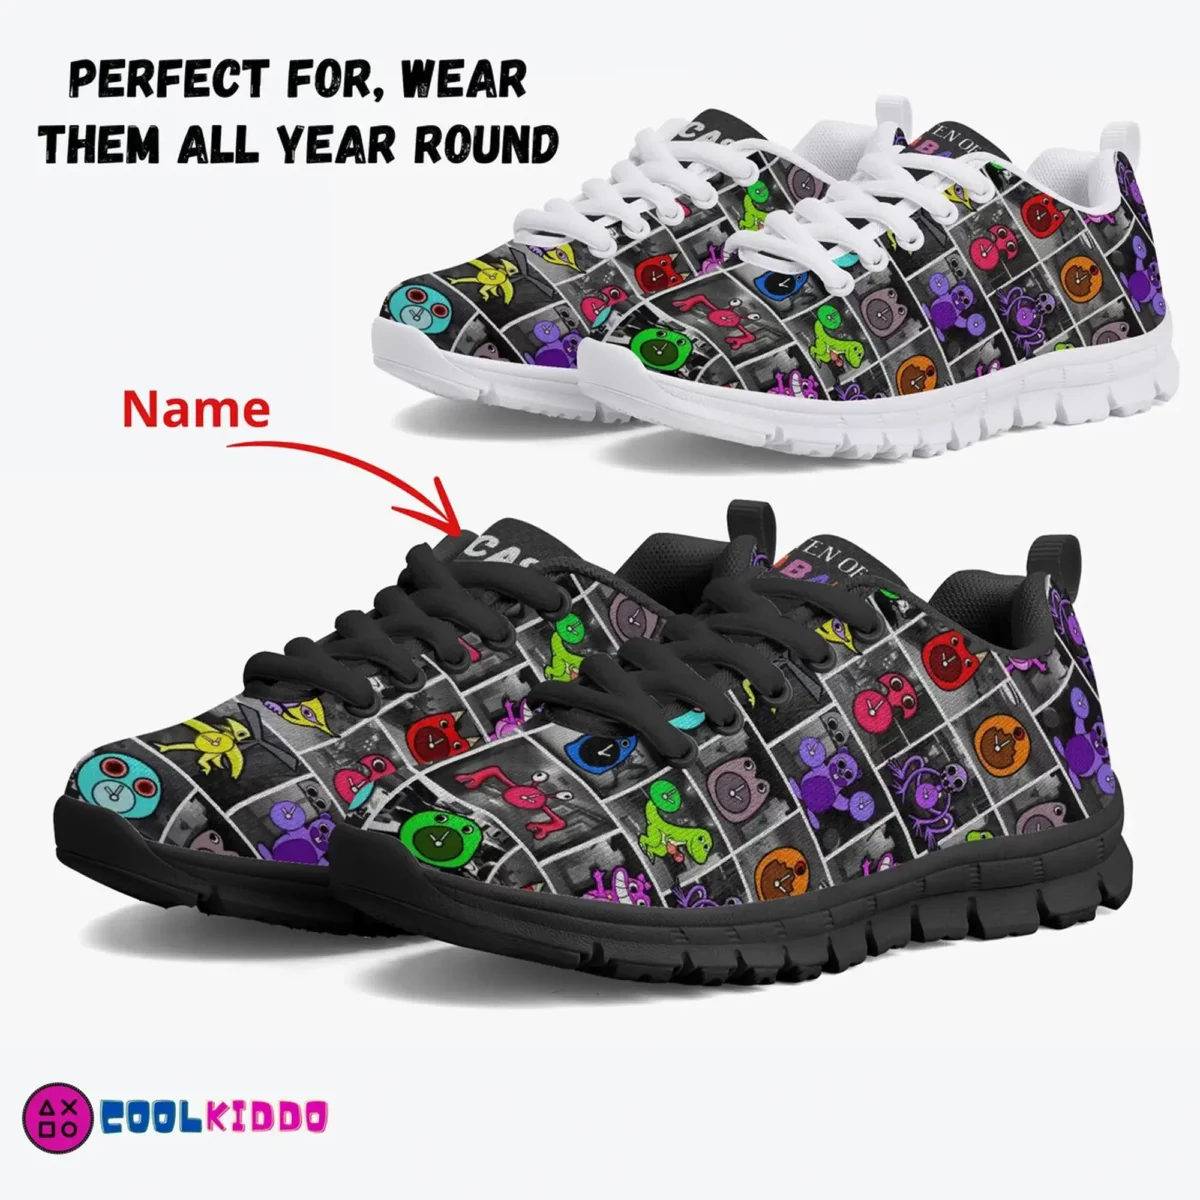 Personalized Garten of Banban Video Game Inspired Lightweight Mesh Blue Sneakers for kids/youth Cool Kiddo 12